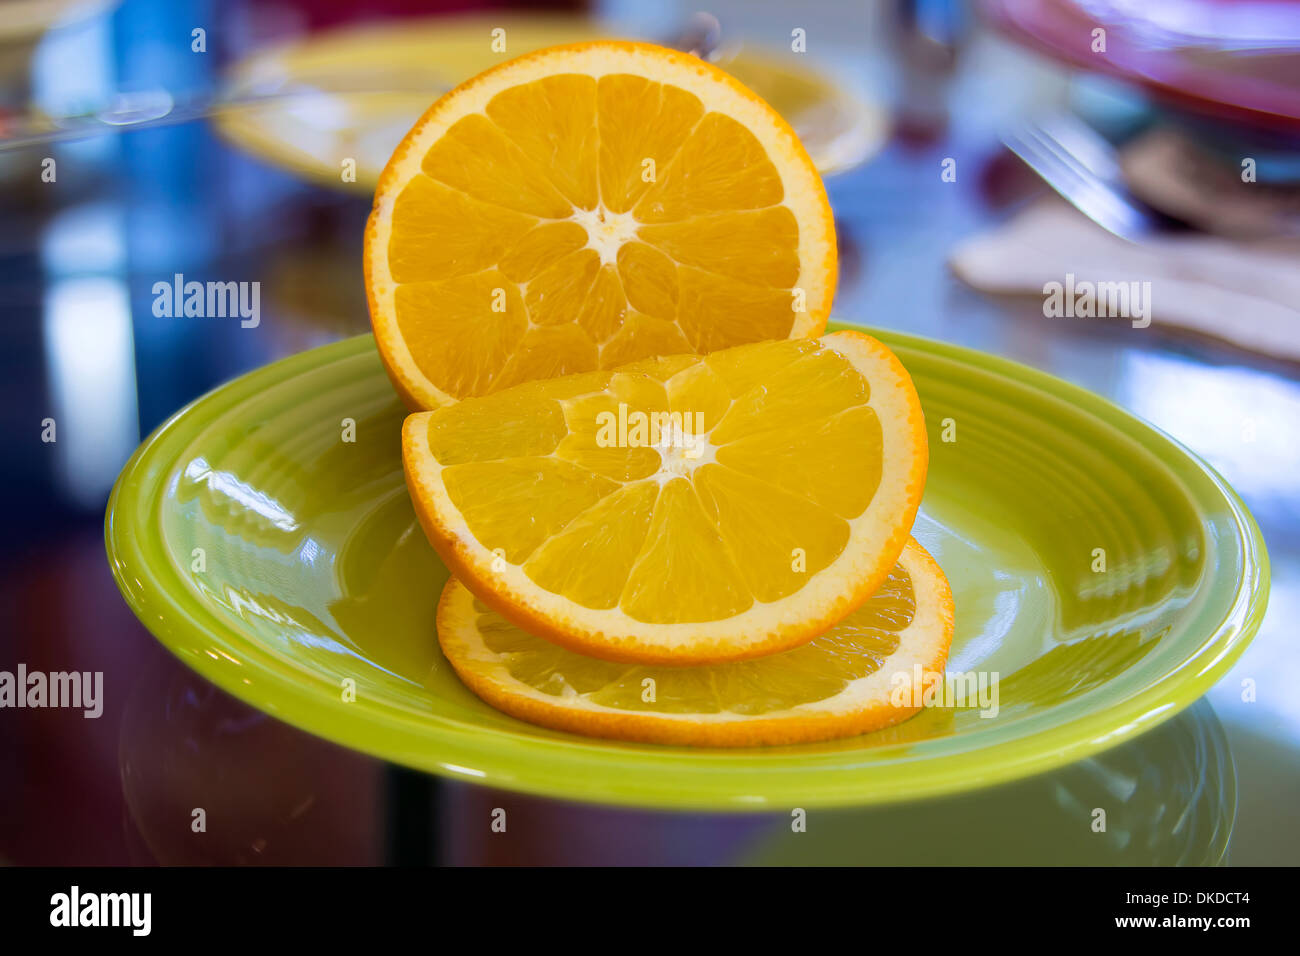 Sliced Orange Fruit for Garnish on Green Plate with Blurred Background Dinner Table Setting Stock Photo